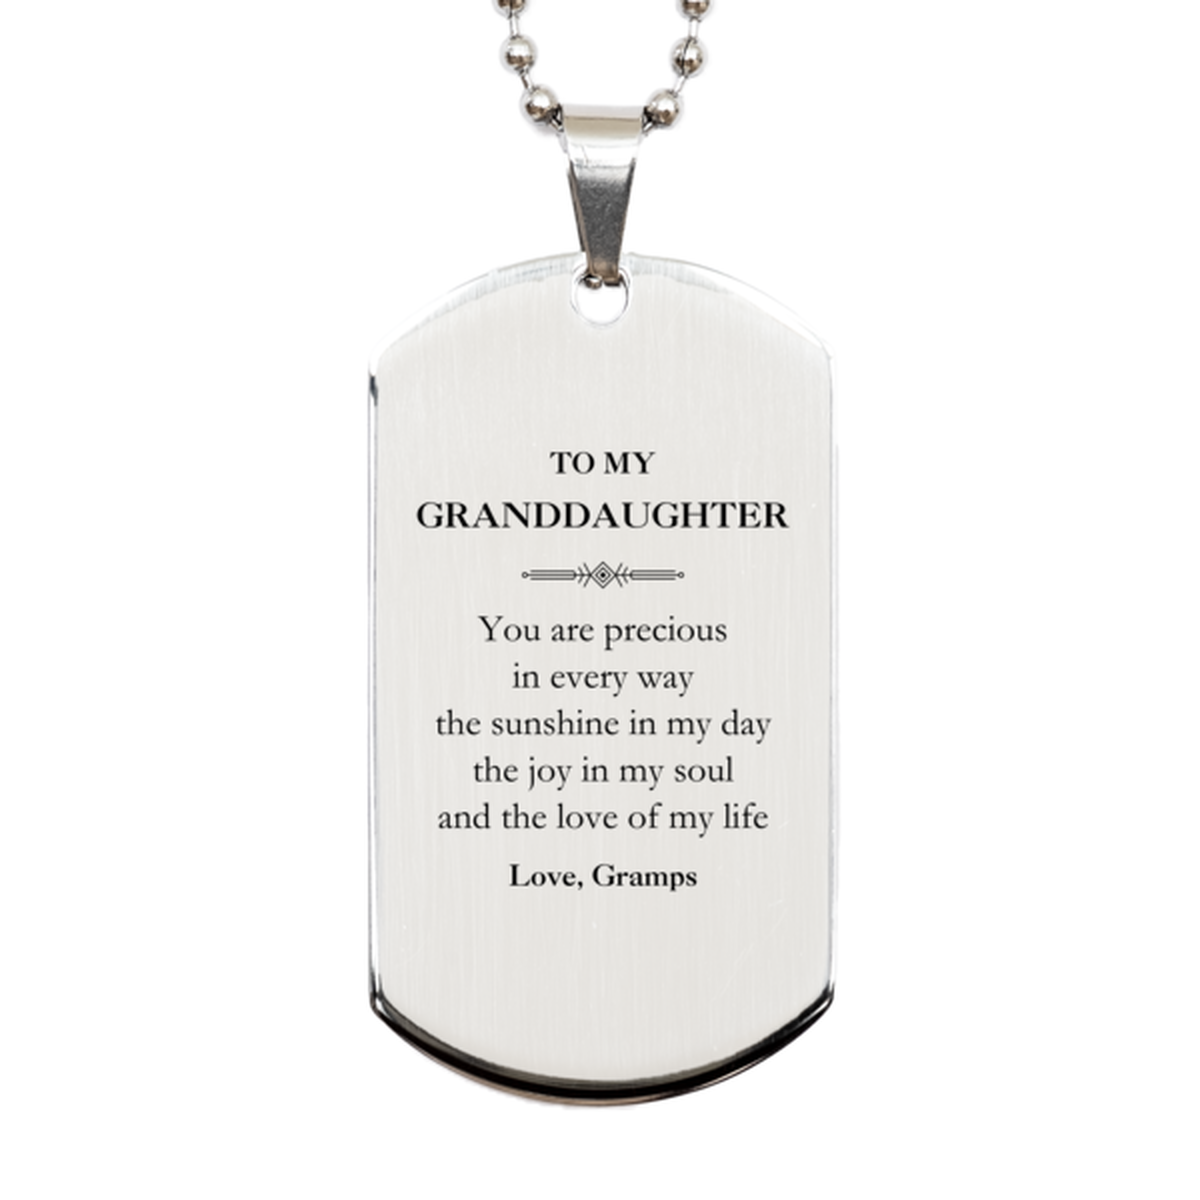 Graduation Gifts for Granddaughter Silver Dog Tag Present from Gramps, Christmas Granddaughter Birthday Gifts Granddaughter You are precious in every way the sunshine in my day. Love, Gramps